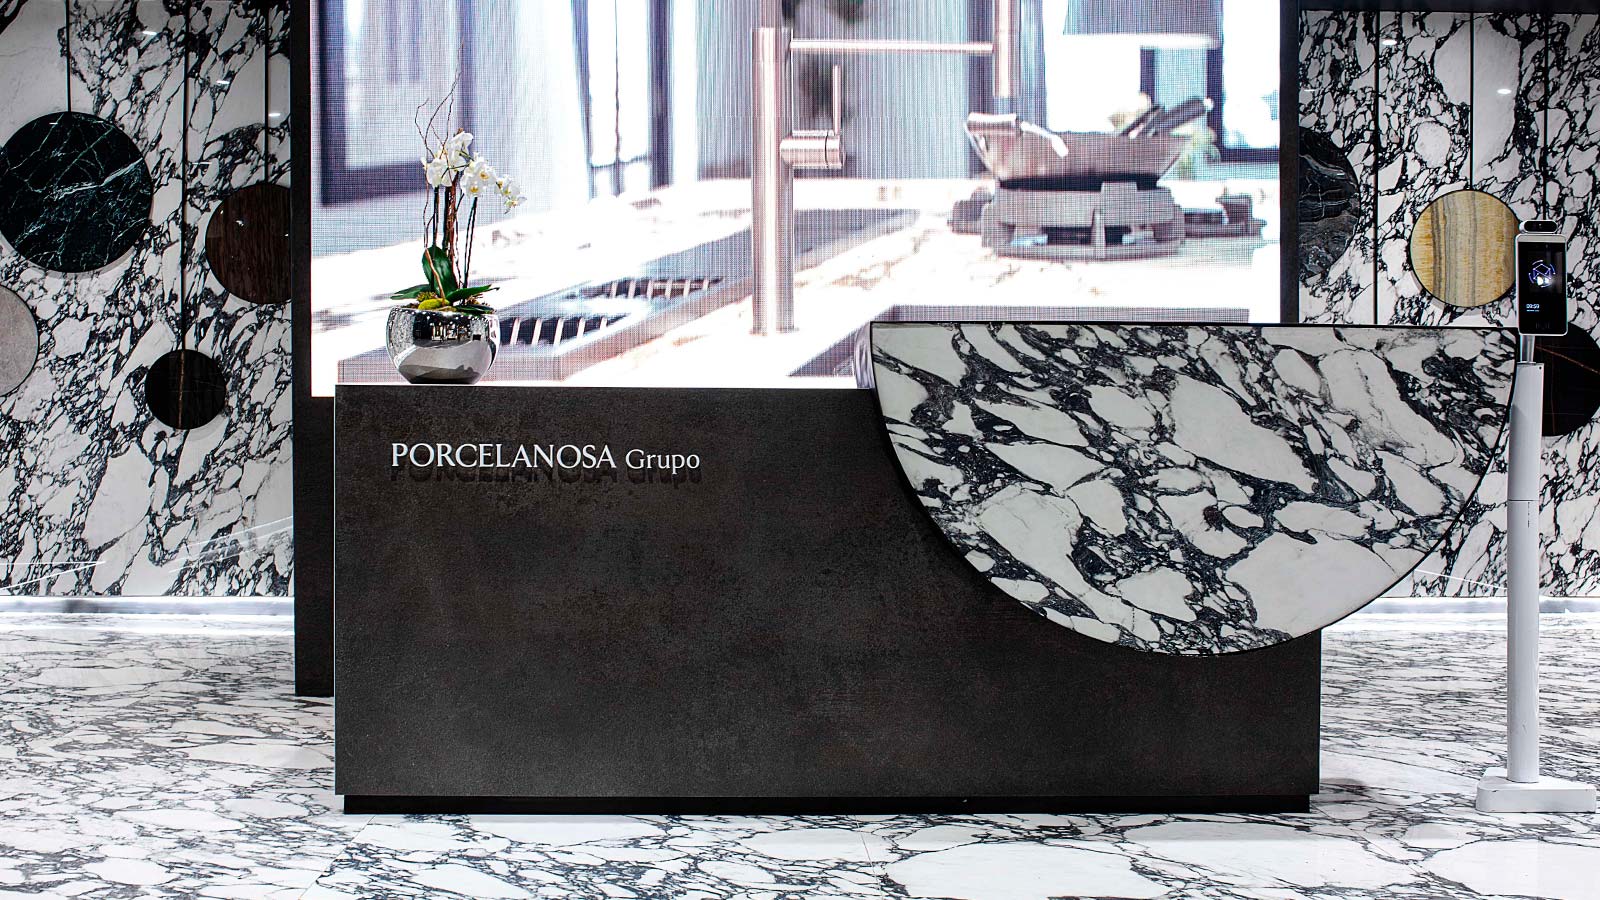 Porcelanosa makes strides in Mexico with new designs and stores